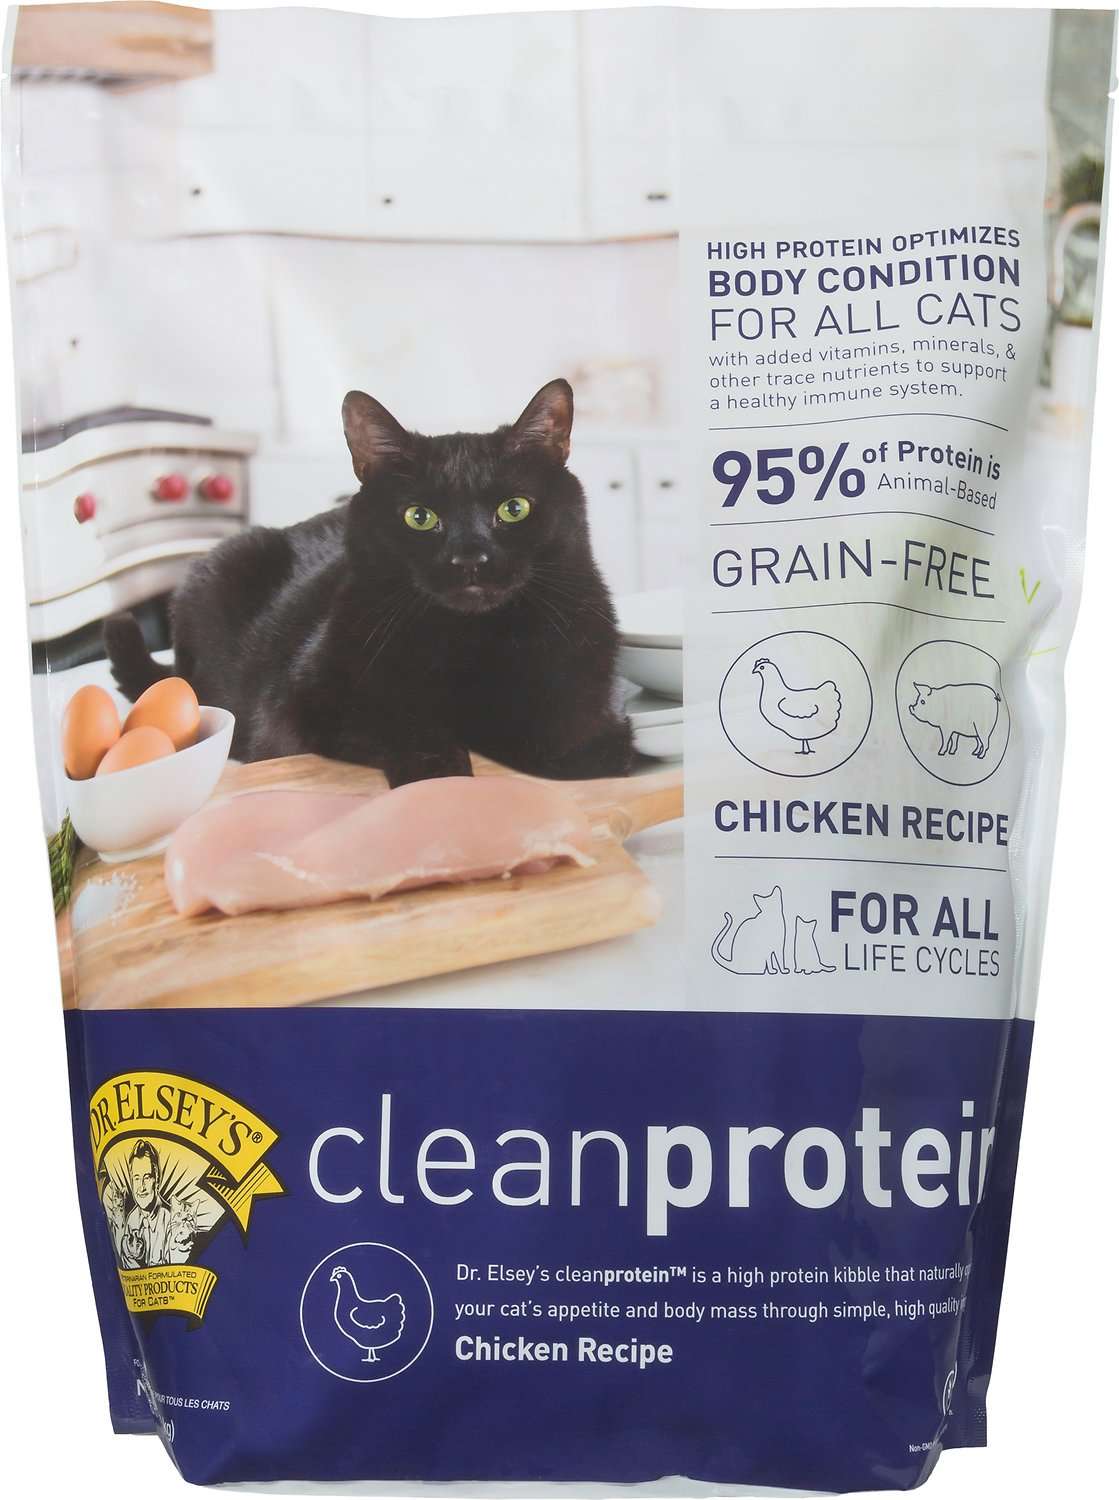 The Best High Protein, Low Carb Cat Food Reviews for 2019